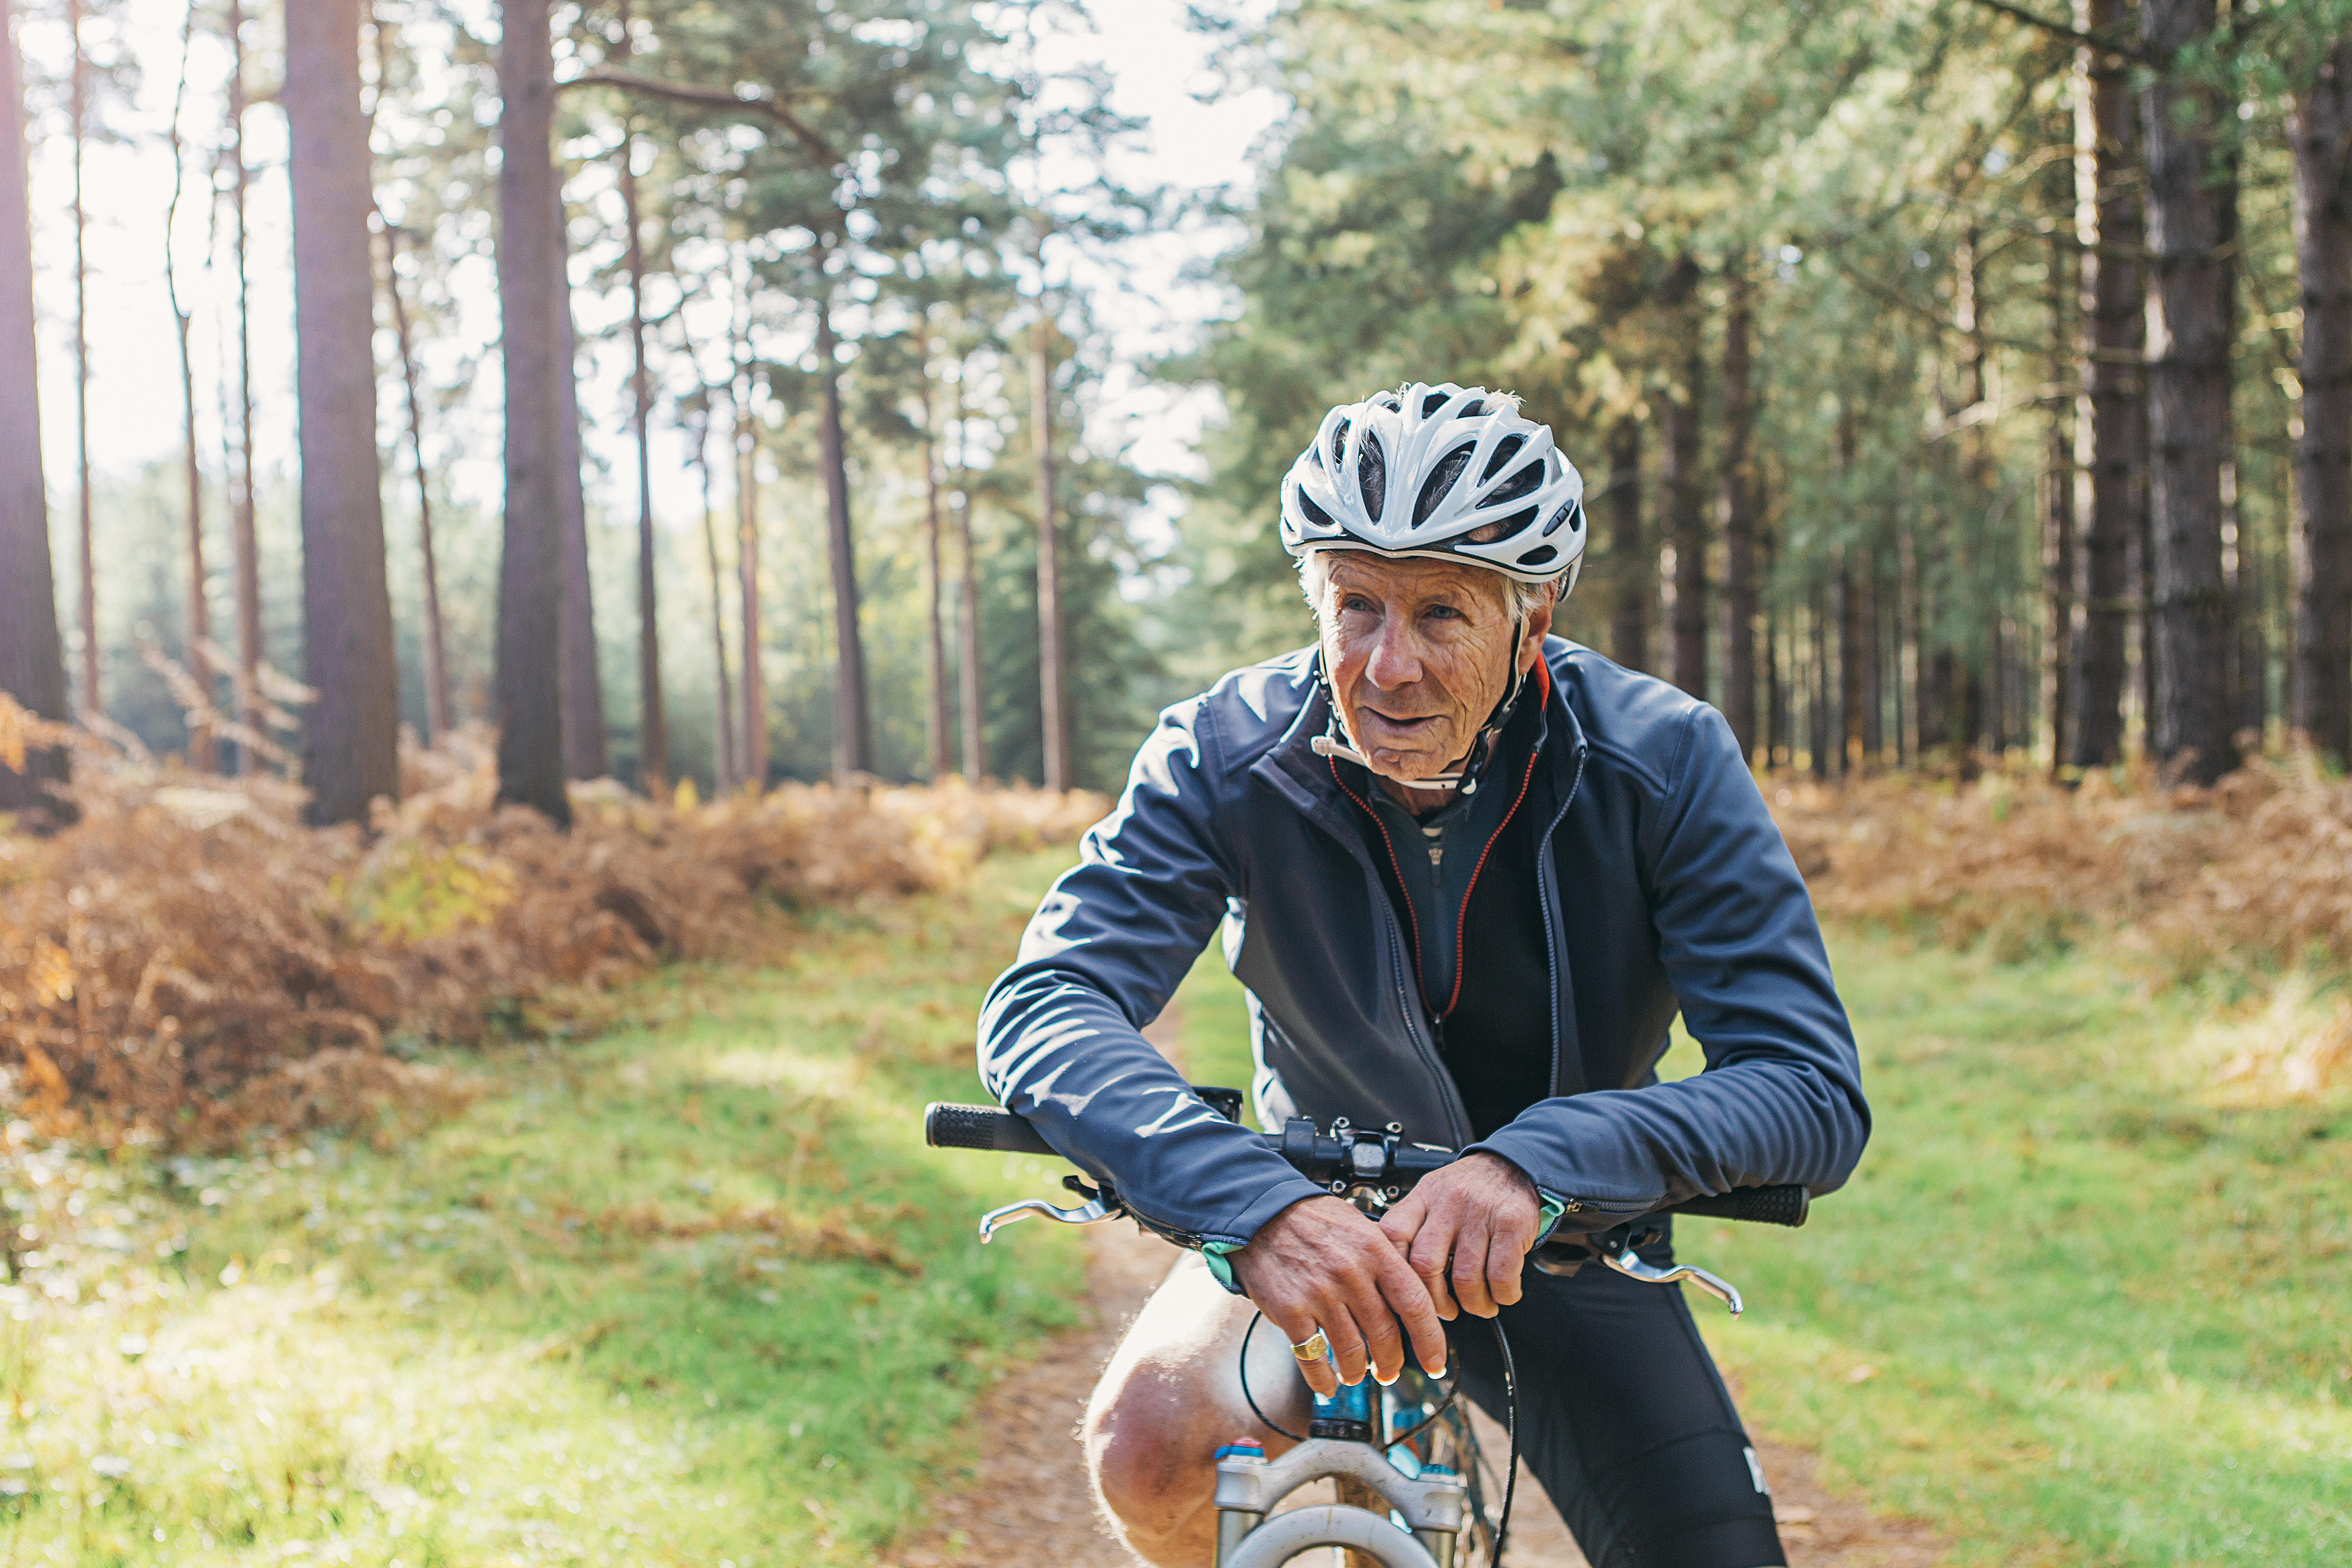 Older man riding a bicycle in a scenic forest